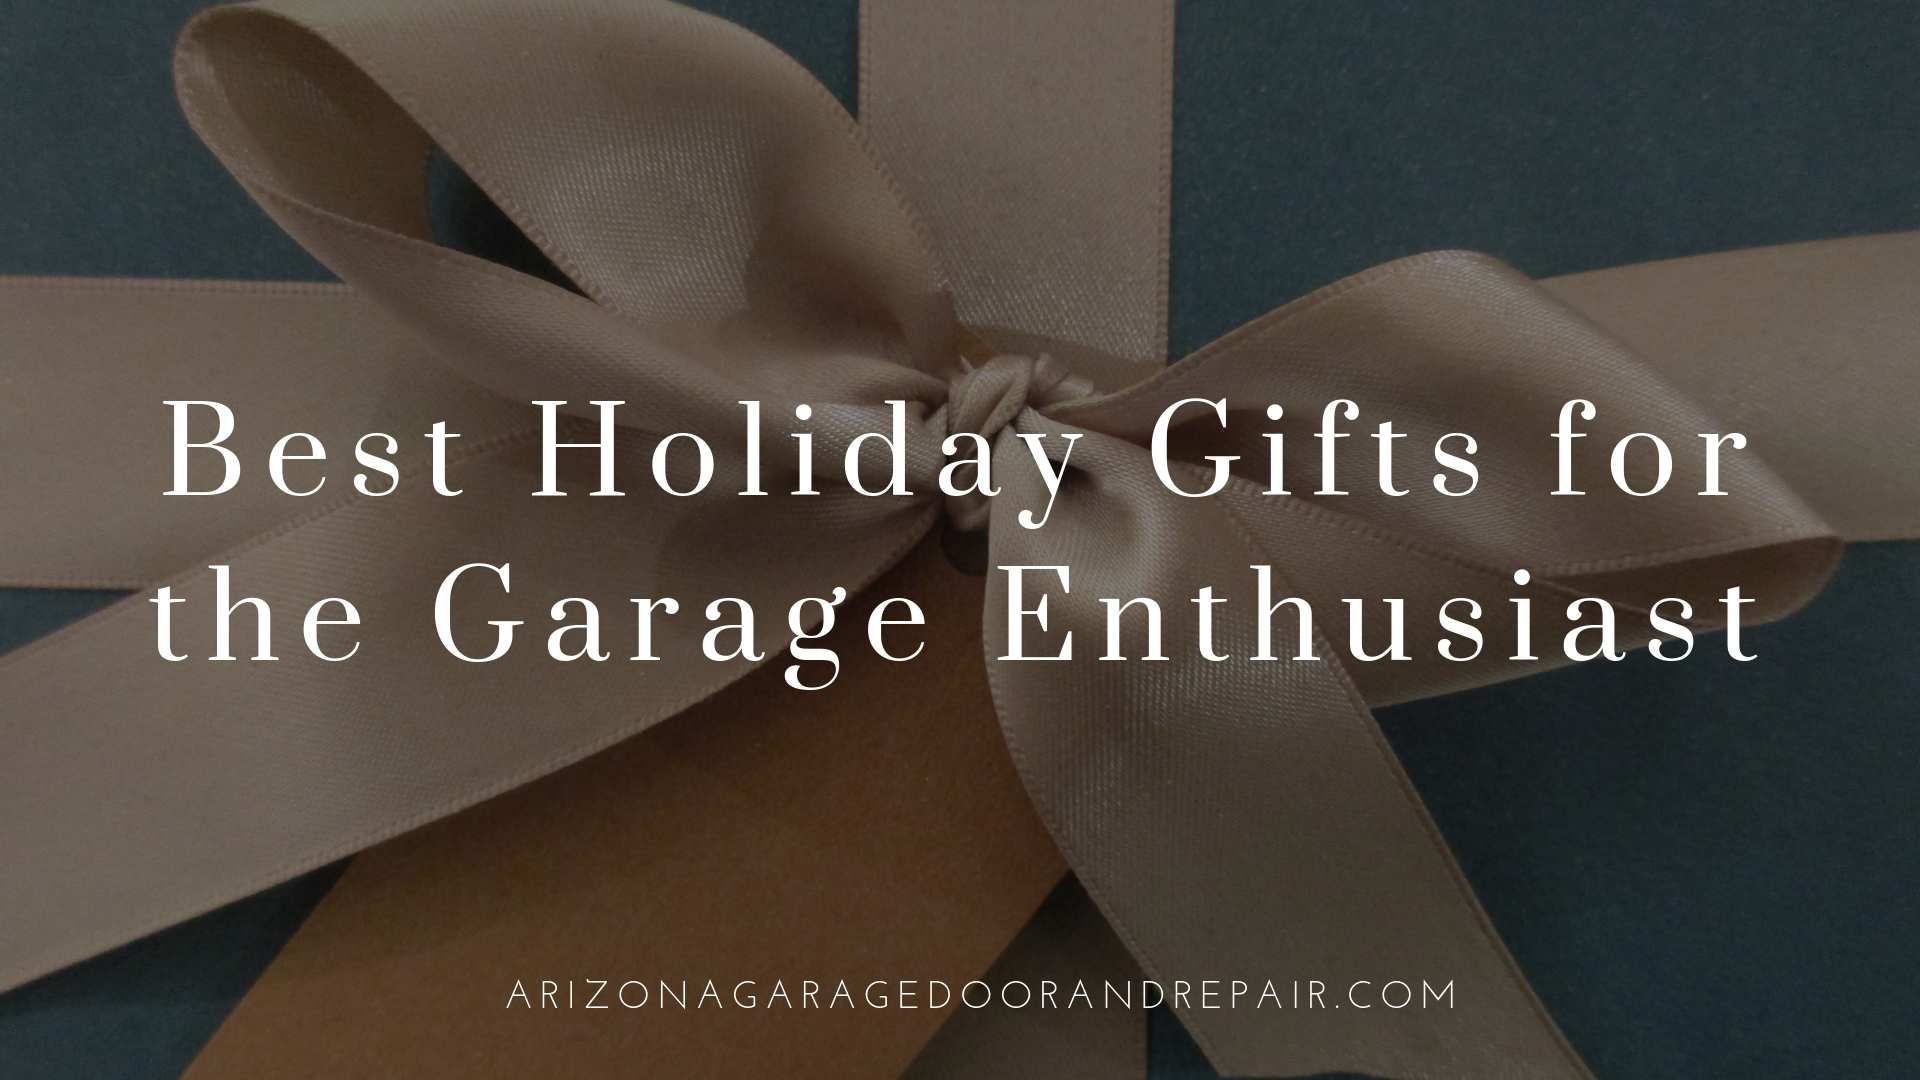 Best Holiday Gifts for the Garage Enthusiast